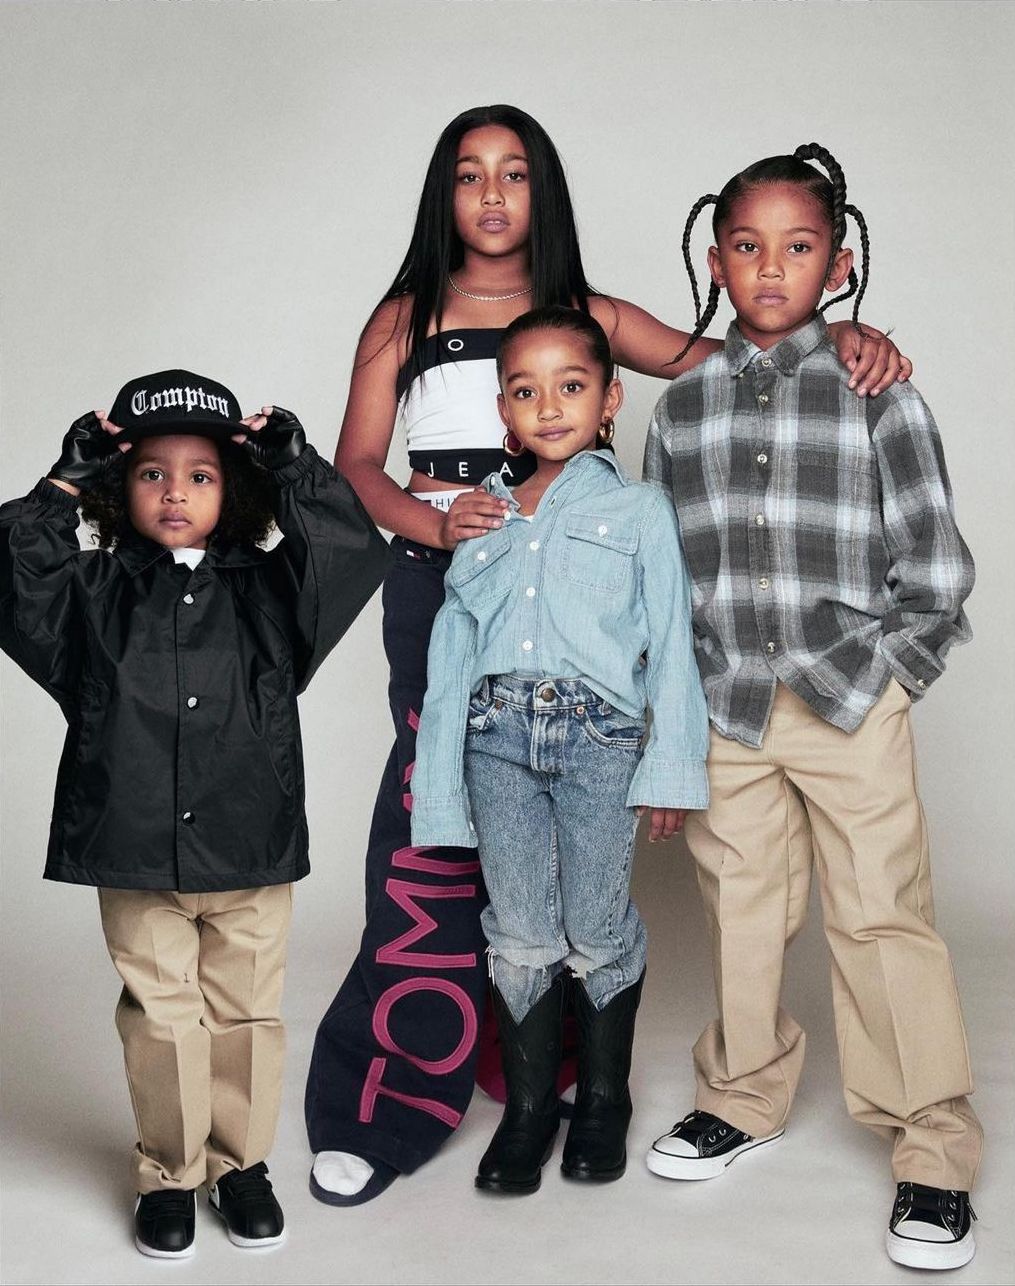 The Kardashian Kids Dressed Up as Hip-Hop Culture Icons Aaliyah, Snoop Dogg, Eazy E and Sade for Halloween